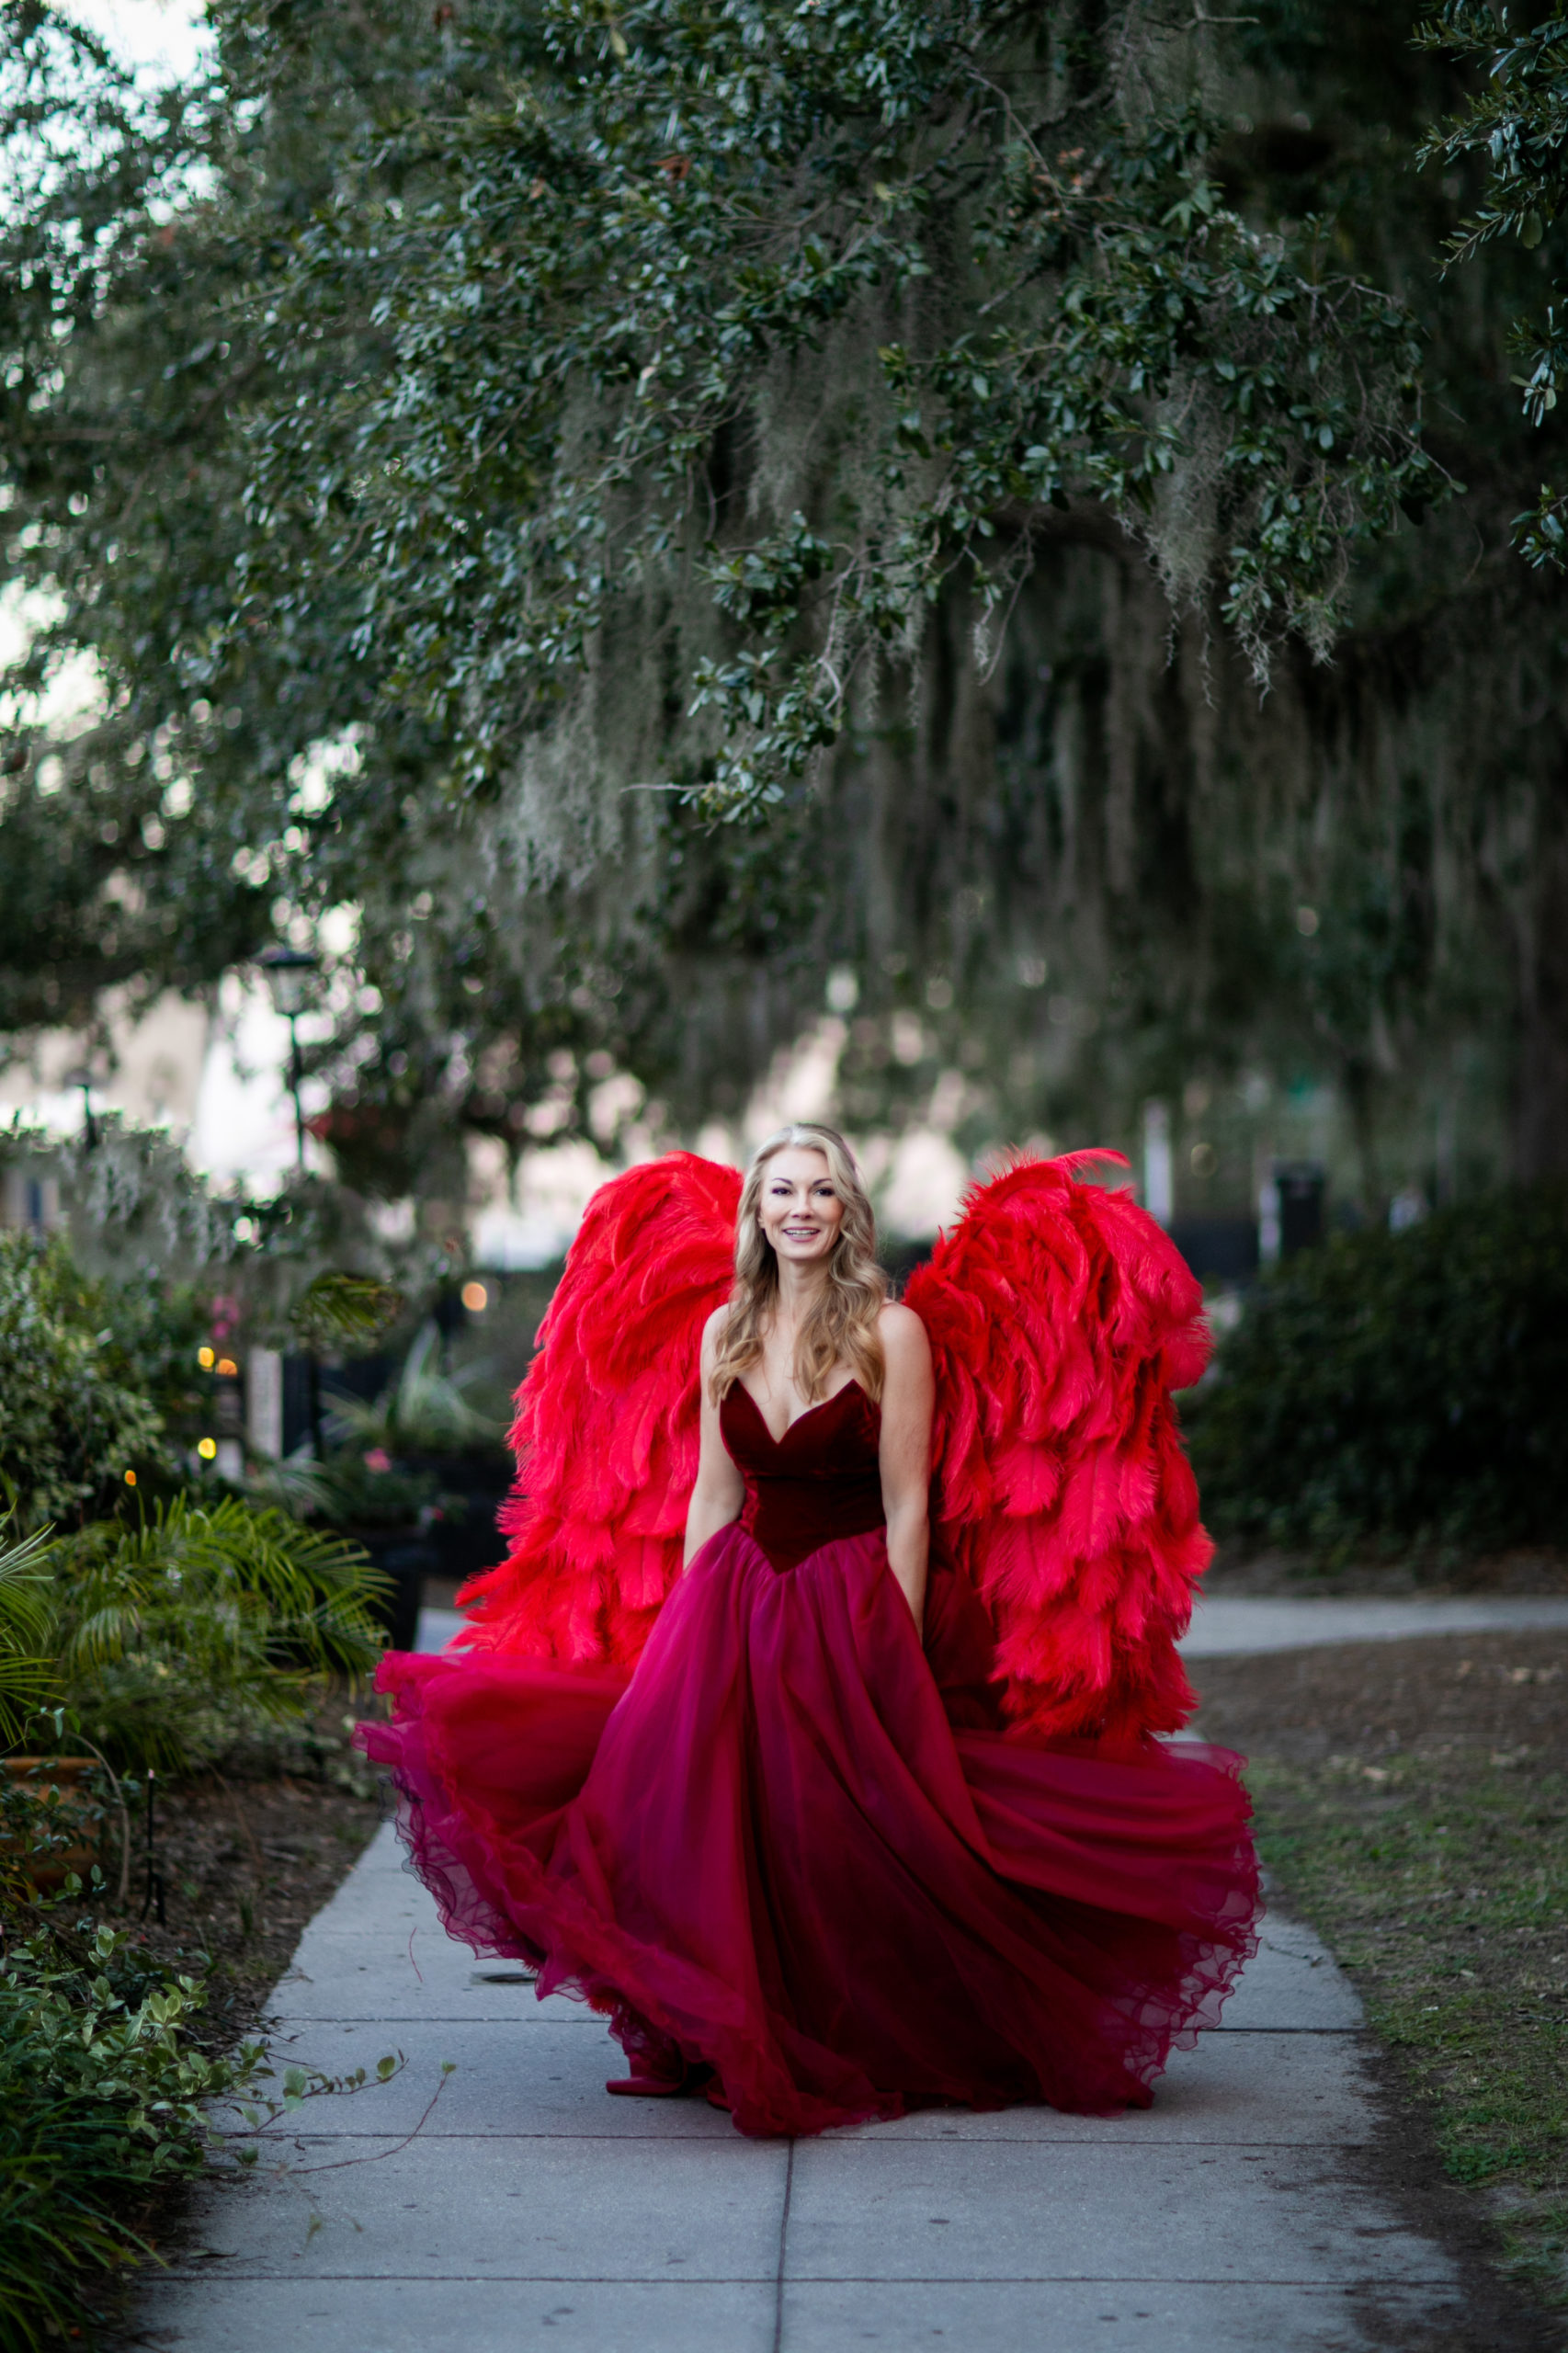 woman posing for outdoor portrait wearing red angel wings and gown